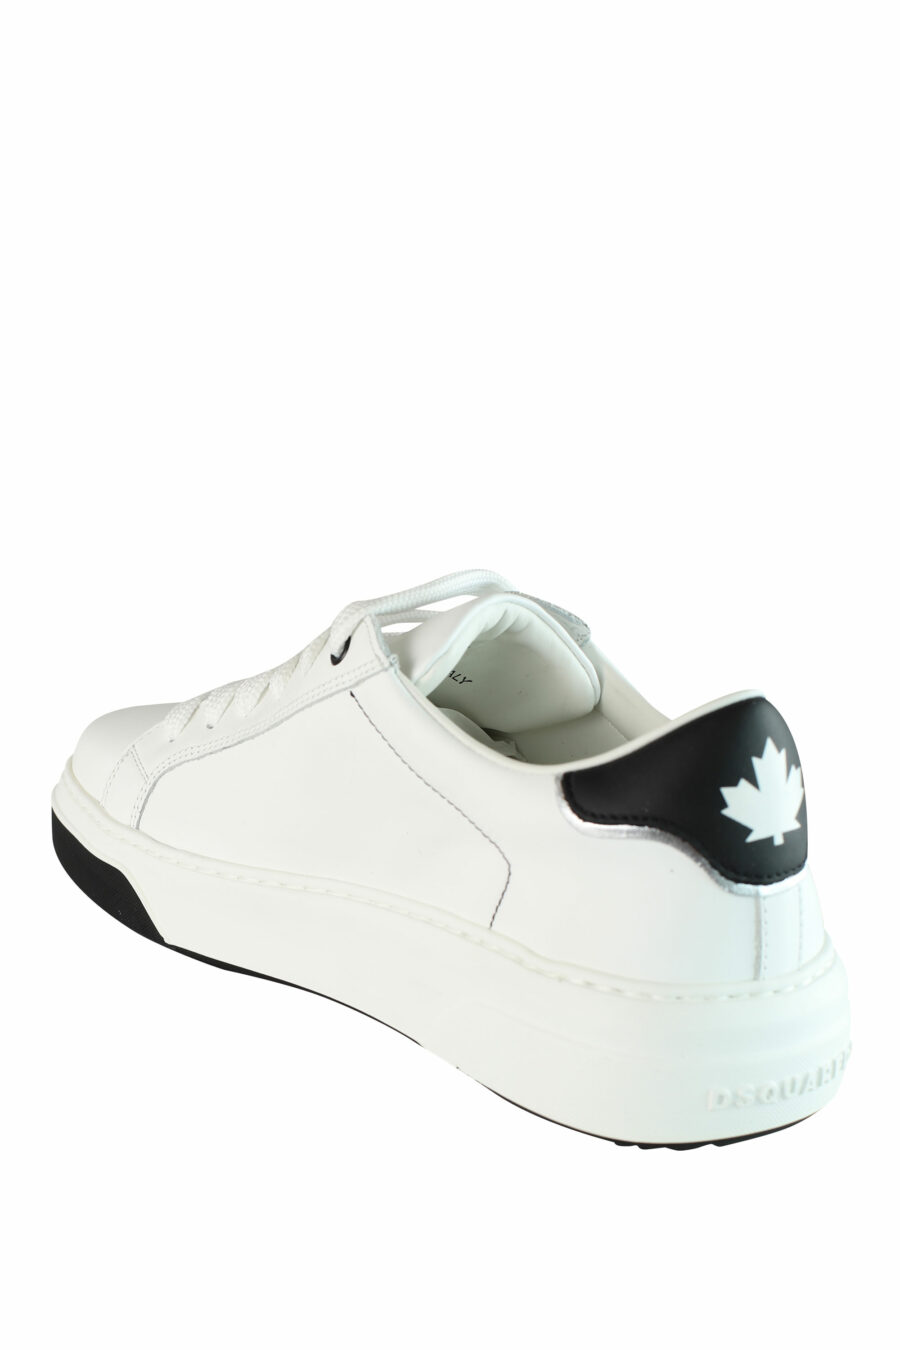 White "bumper" trainers with black details and logo - IMG 1428